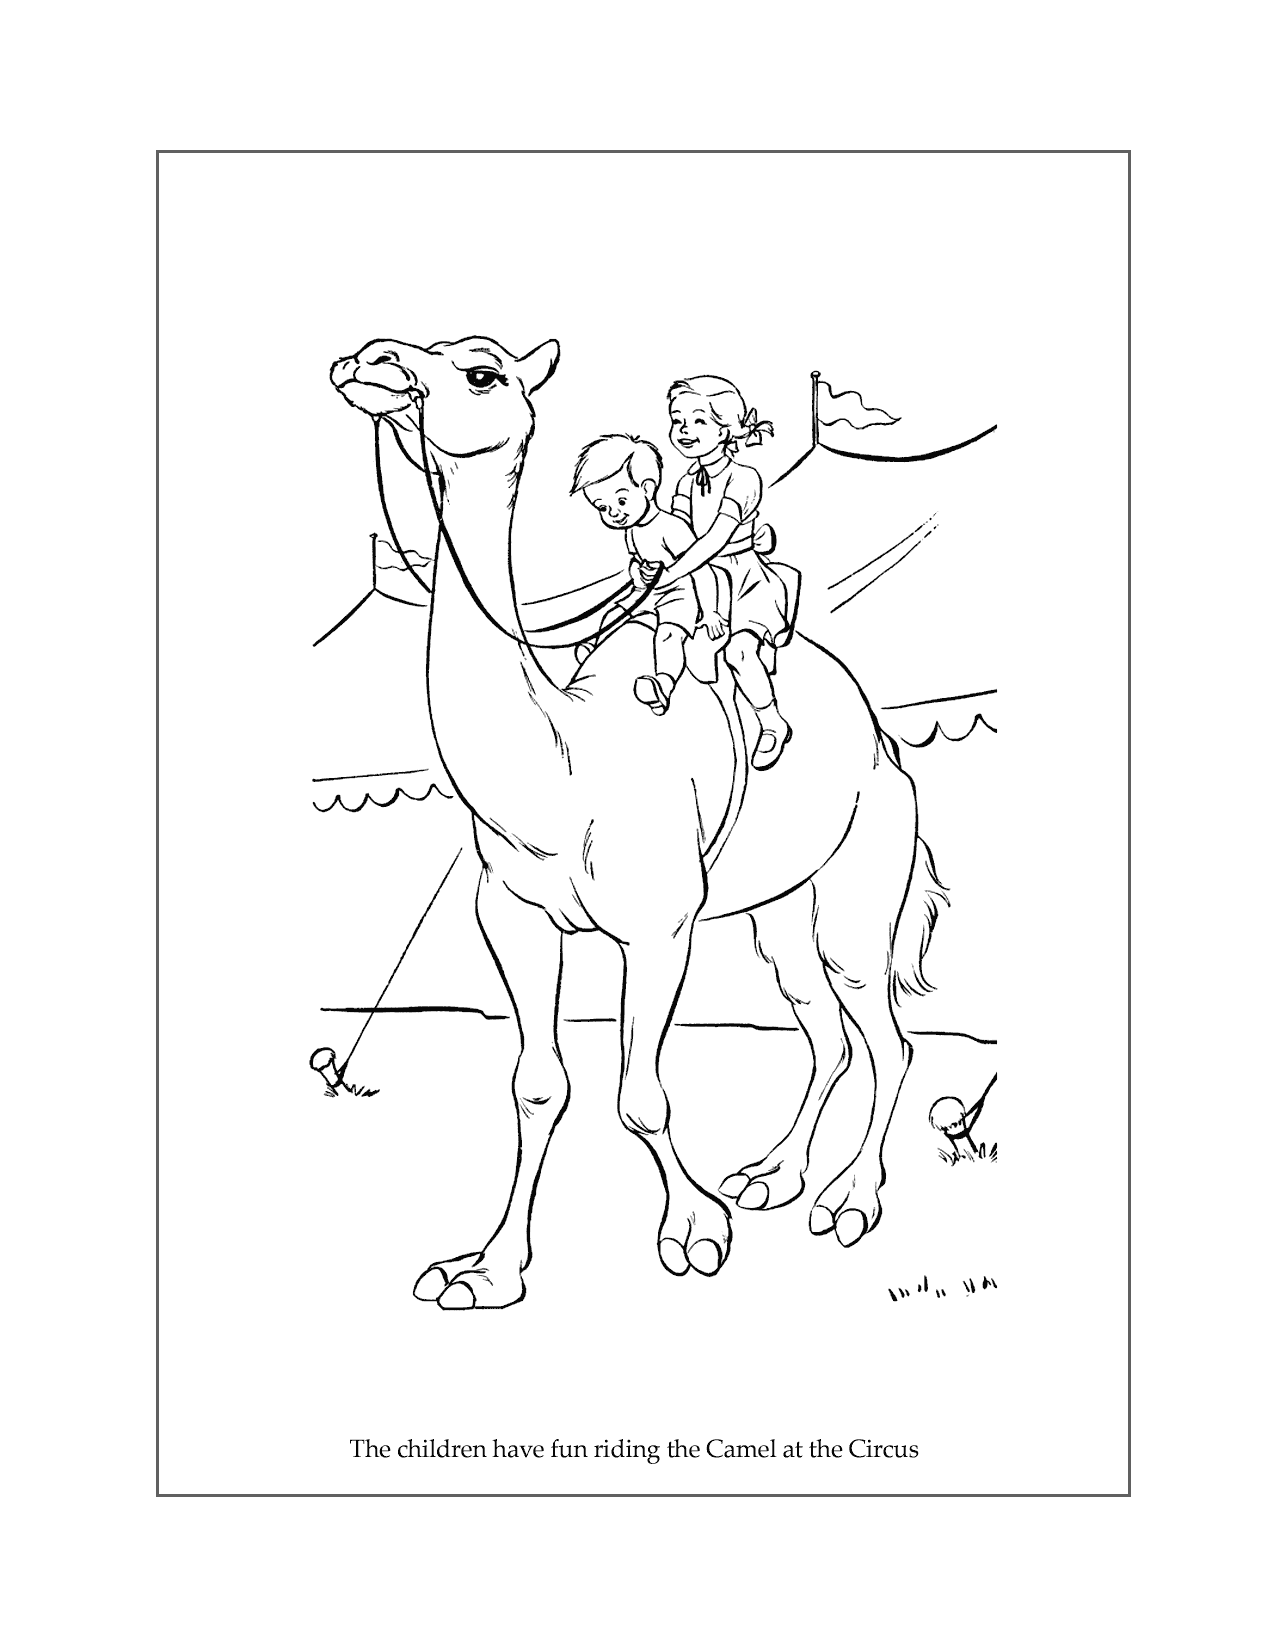 Children Ride The Camel At The Circus Coloring Page